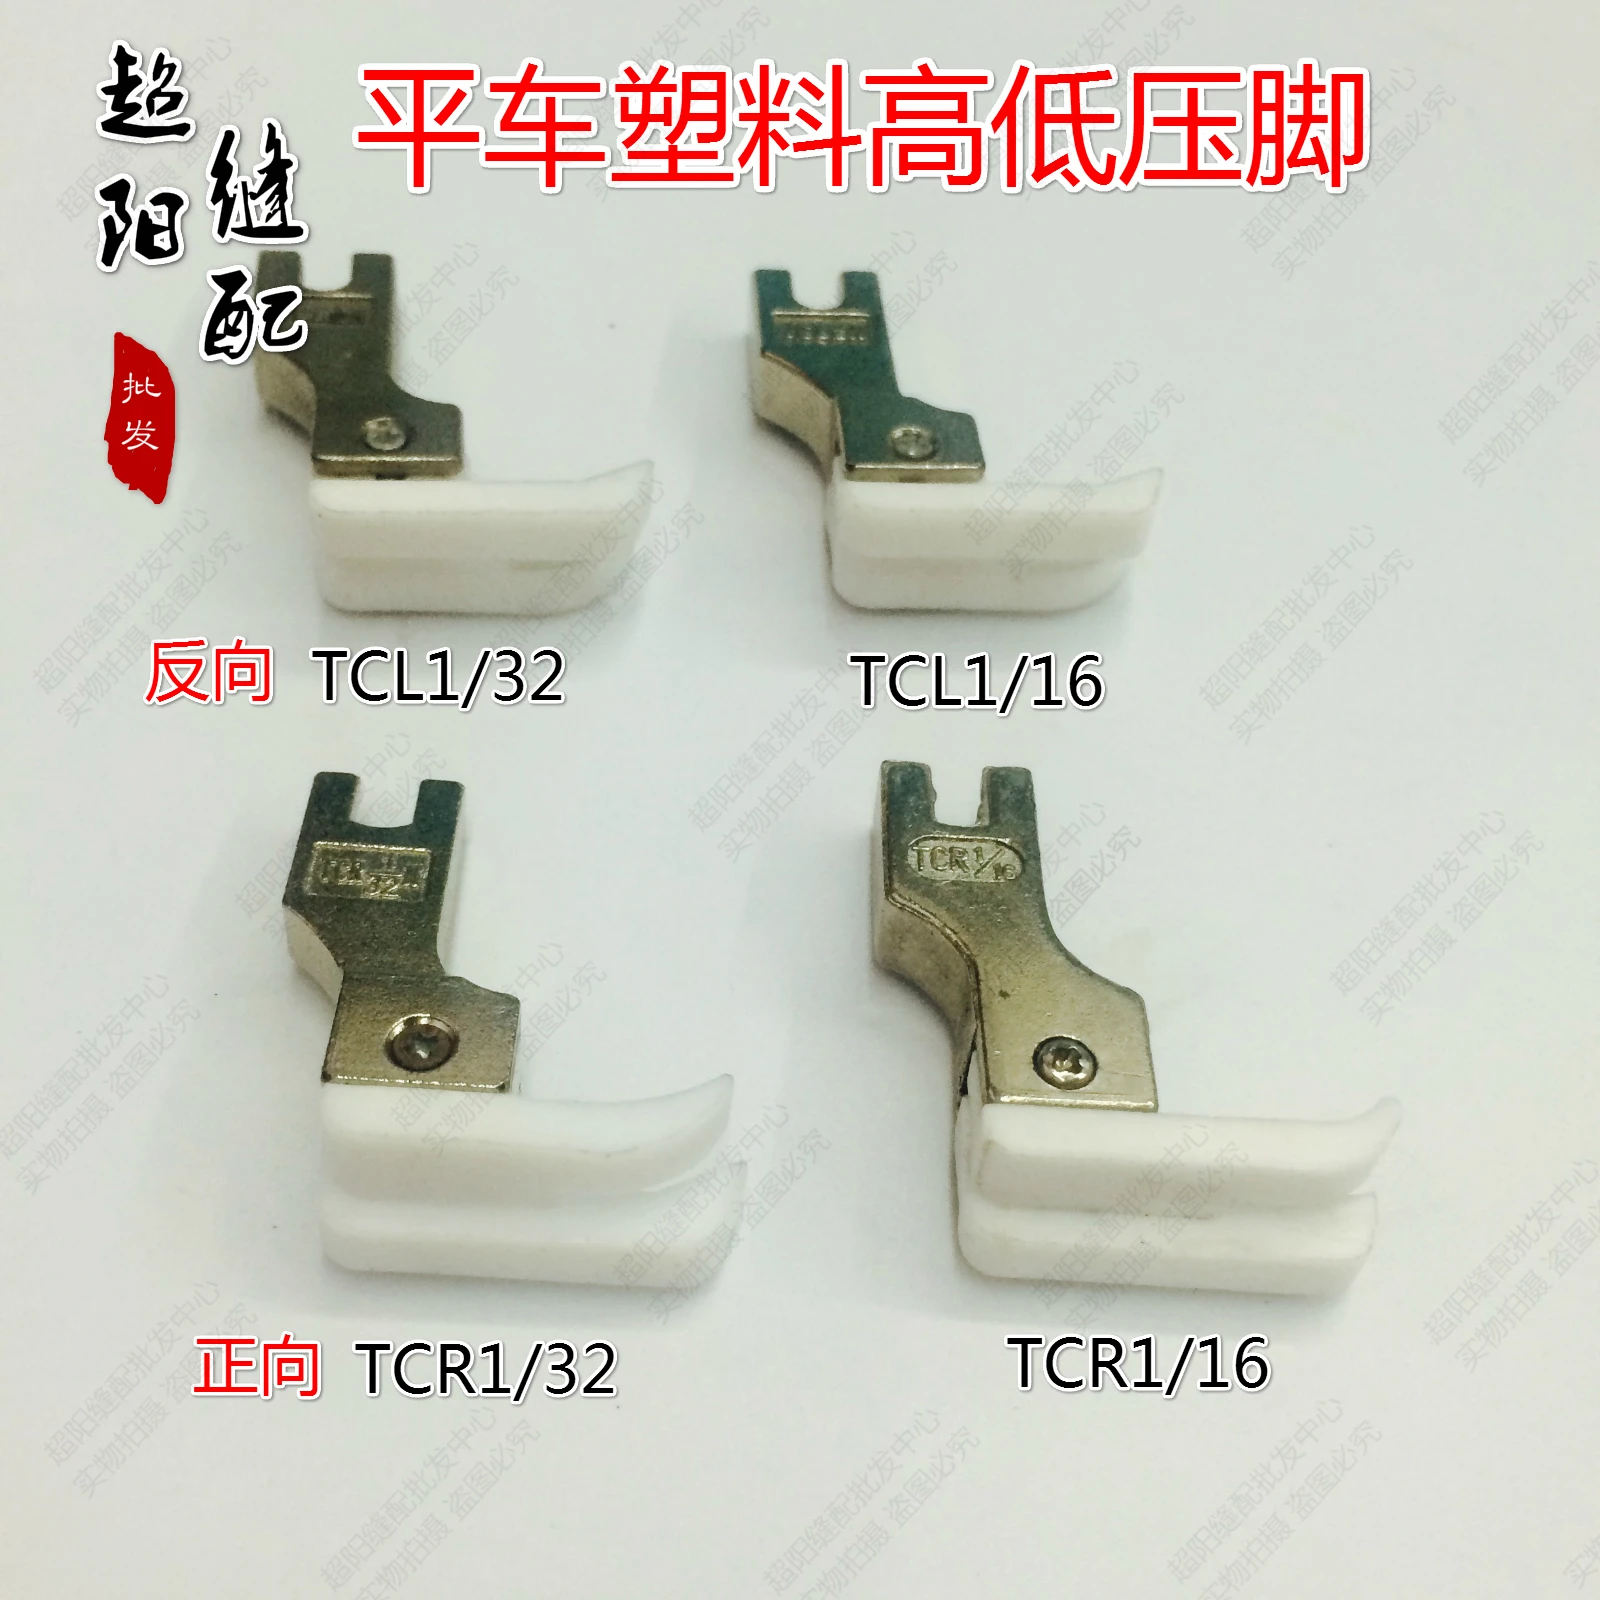 

Industrial sewing machines General pressure foot plastic high and low pressure foot stop 0.1 0.2 TCR1/32N TCL1/16 foot press paw